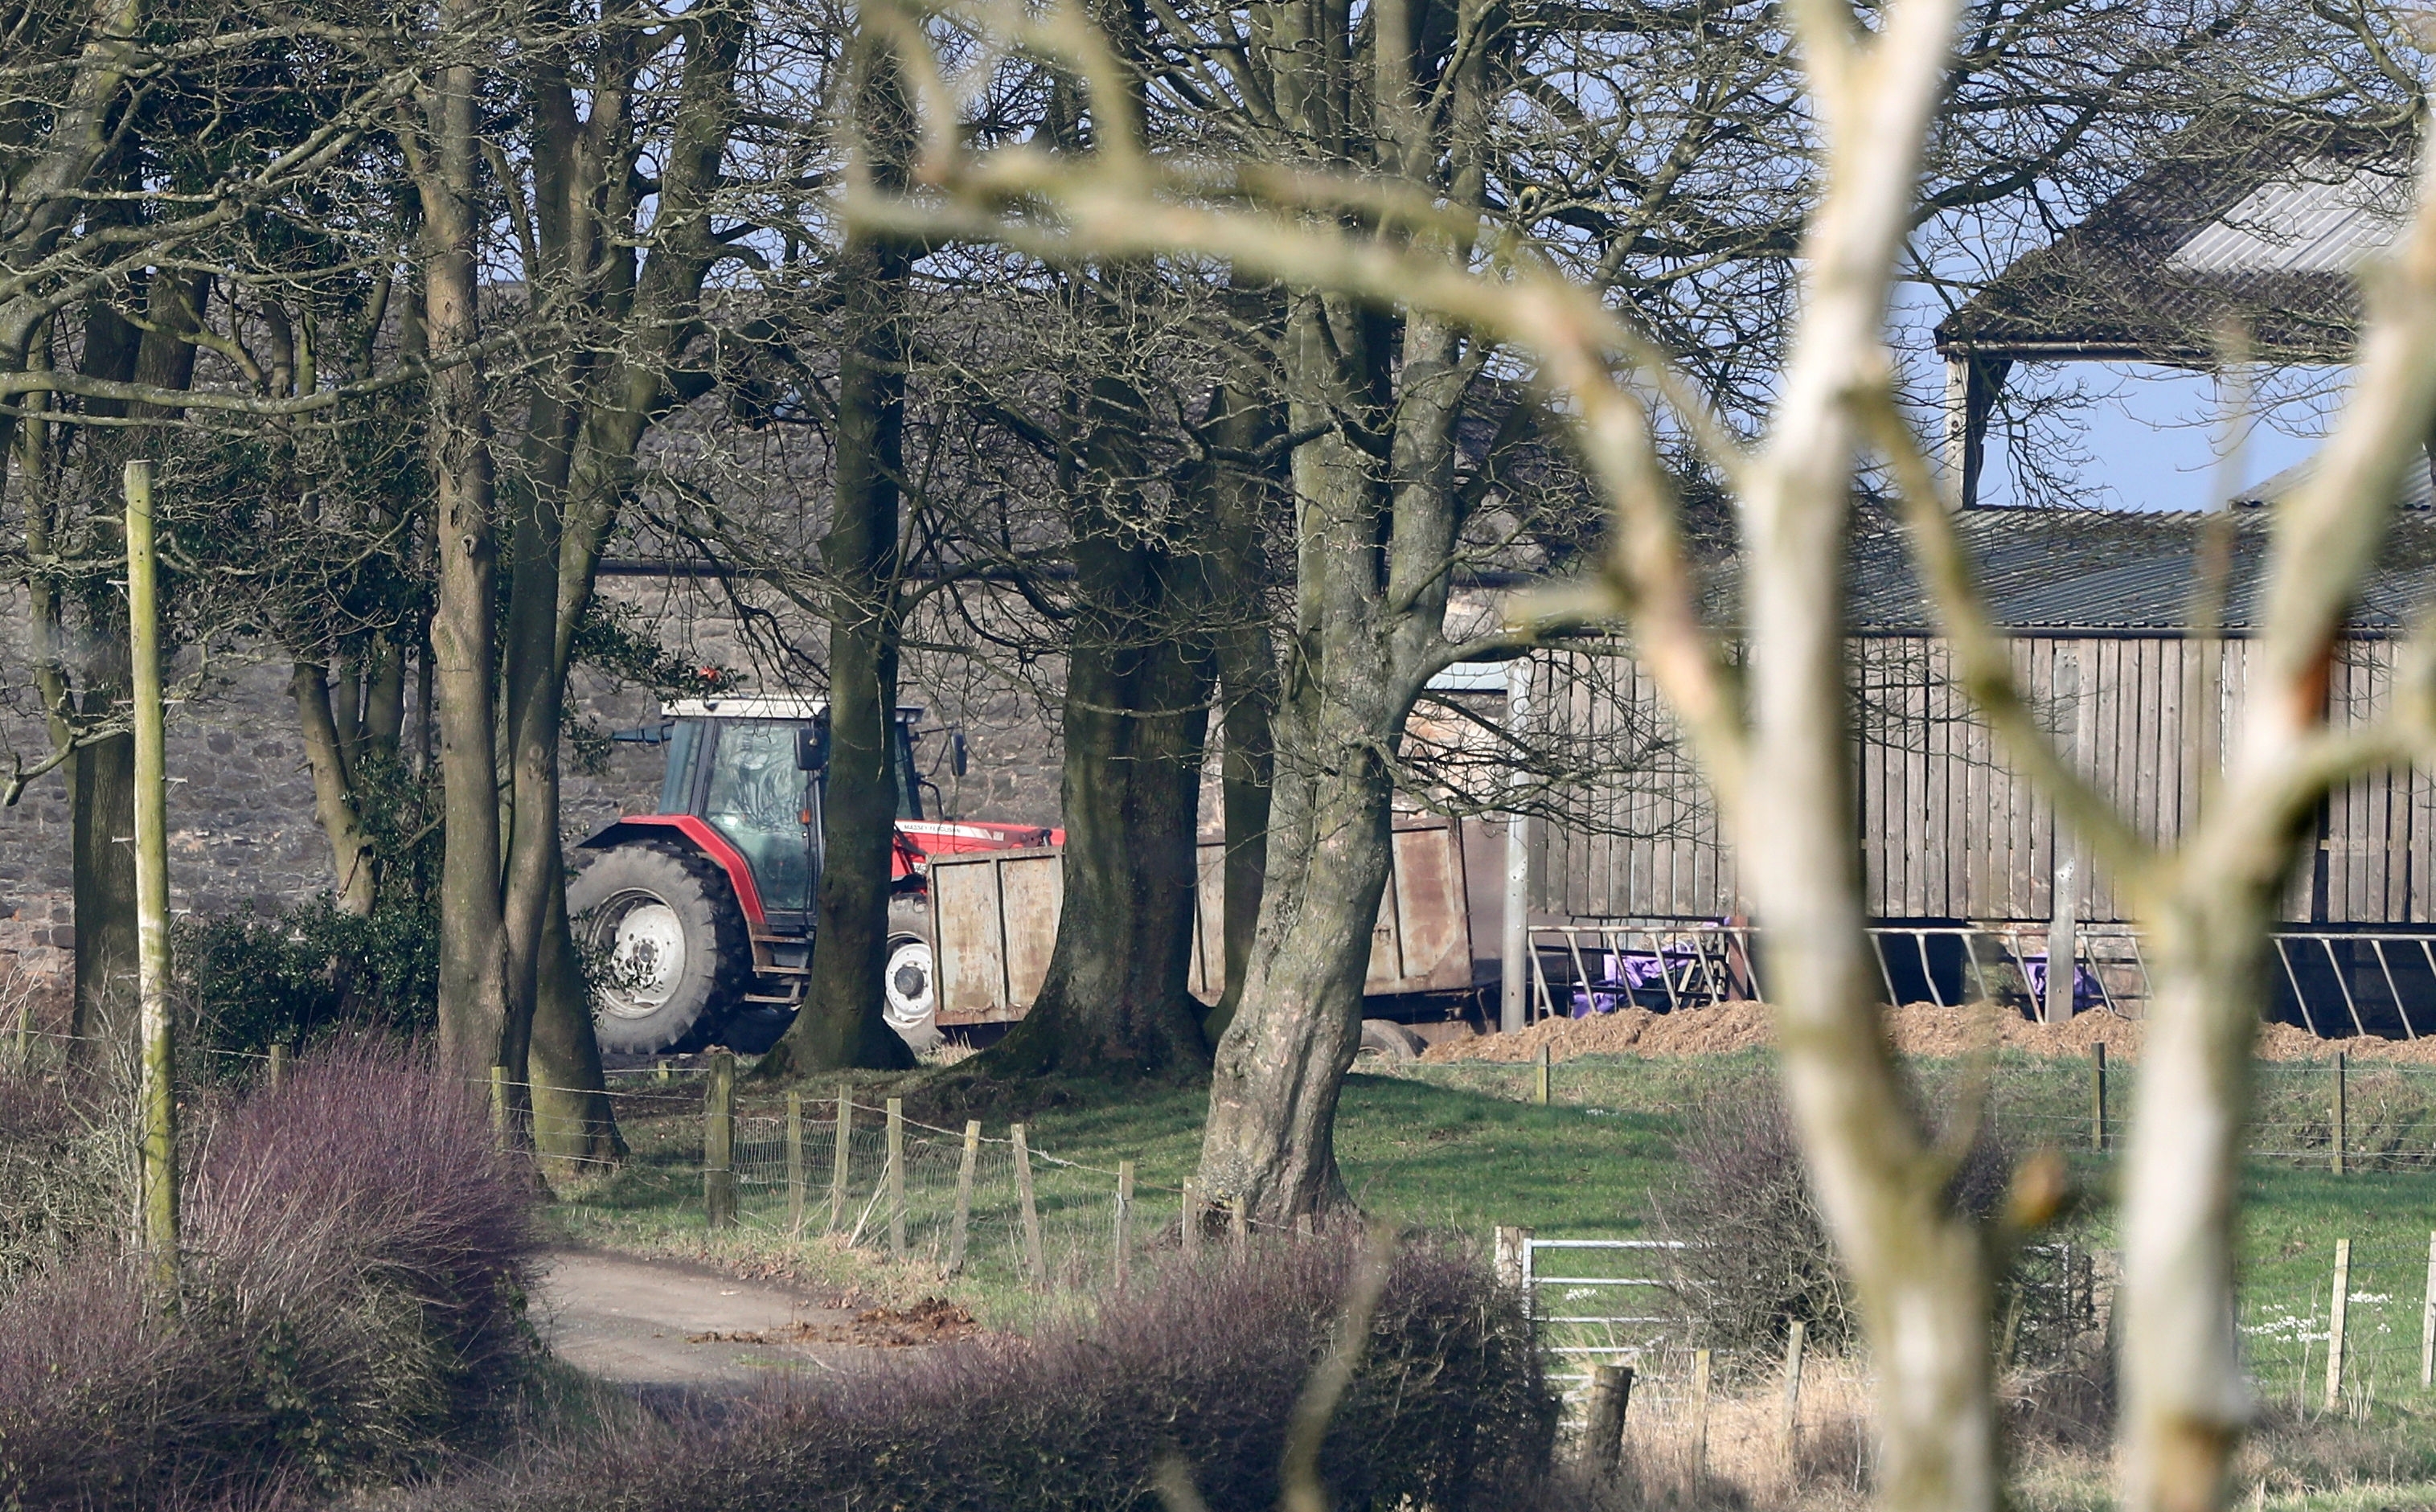 A general view of Cuttle Hill Farm in Fife where a three-year-old boy was killed after being knocked down